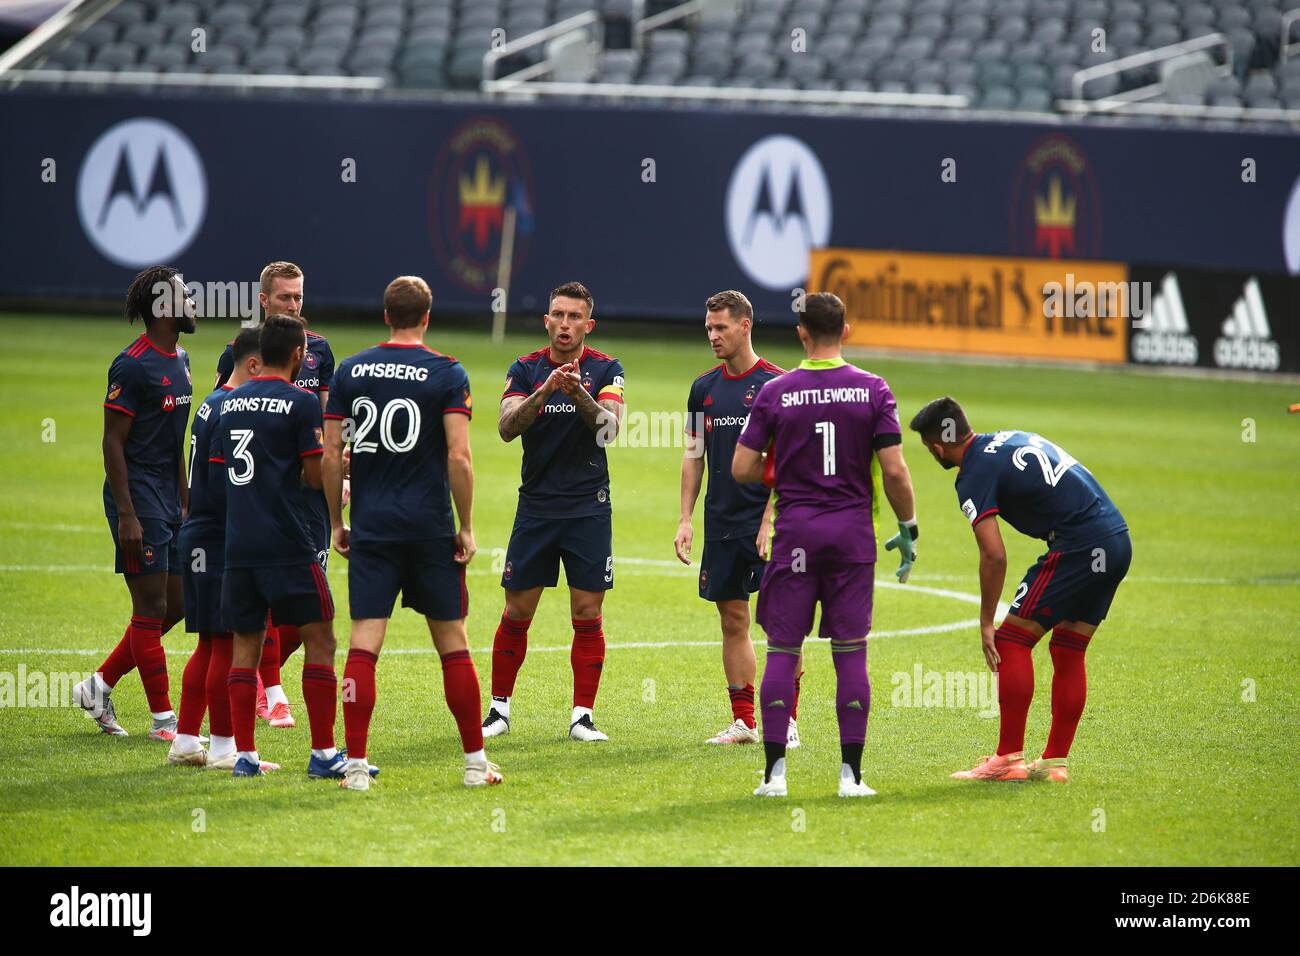 Chicago, United States . 17th Oct, 2020. Chicago Fire FC Starting XI huddle during a MLS match against the Sporting Kanas City at Solider Field, Saturday, Oct. 17, 2020, in Chicago, Illinois. The Fire tie Sporting KC 2-2 (IOS/ESPA-Images) Credit: European Sports Photo Agency/Alamy Live News Stock Photo